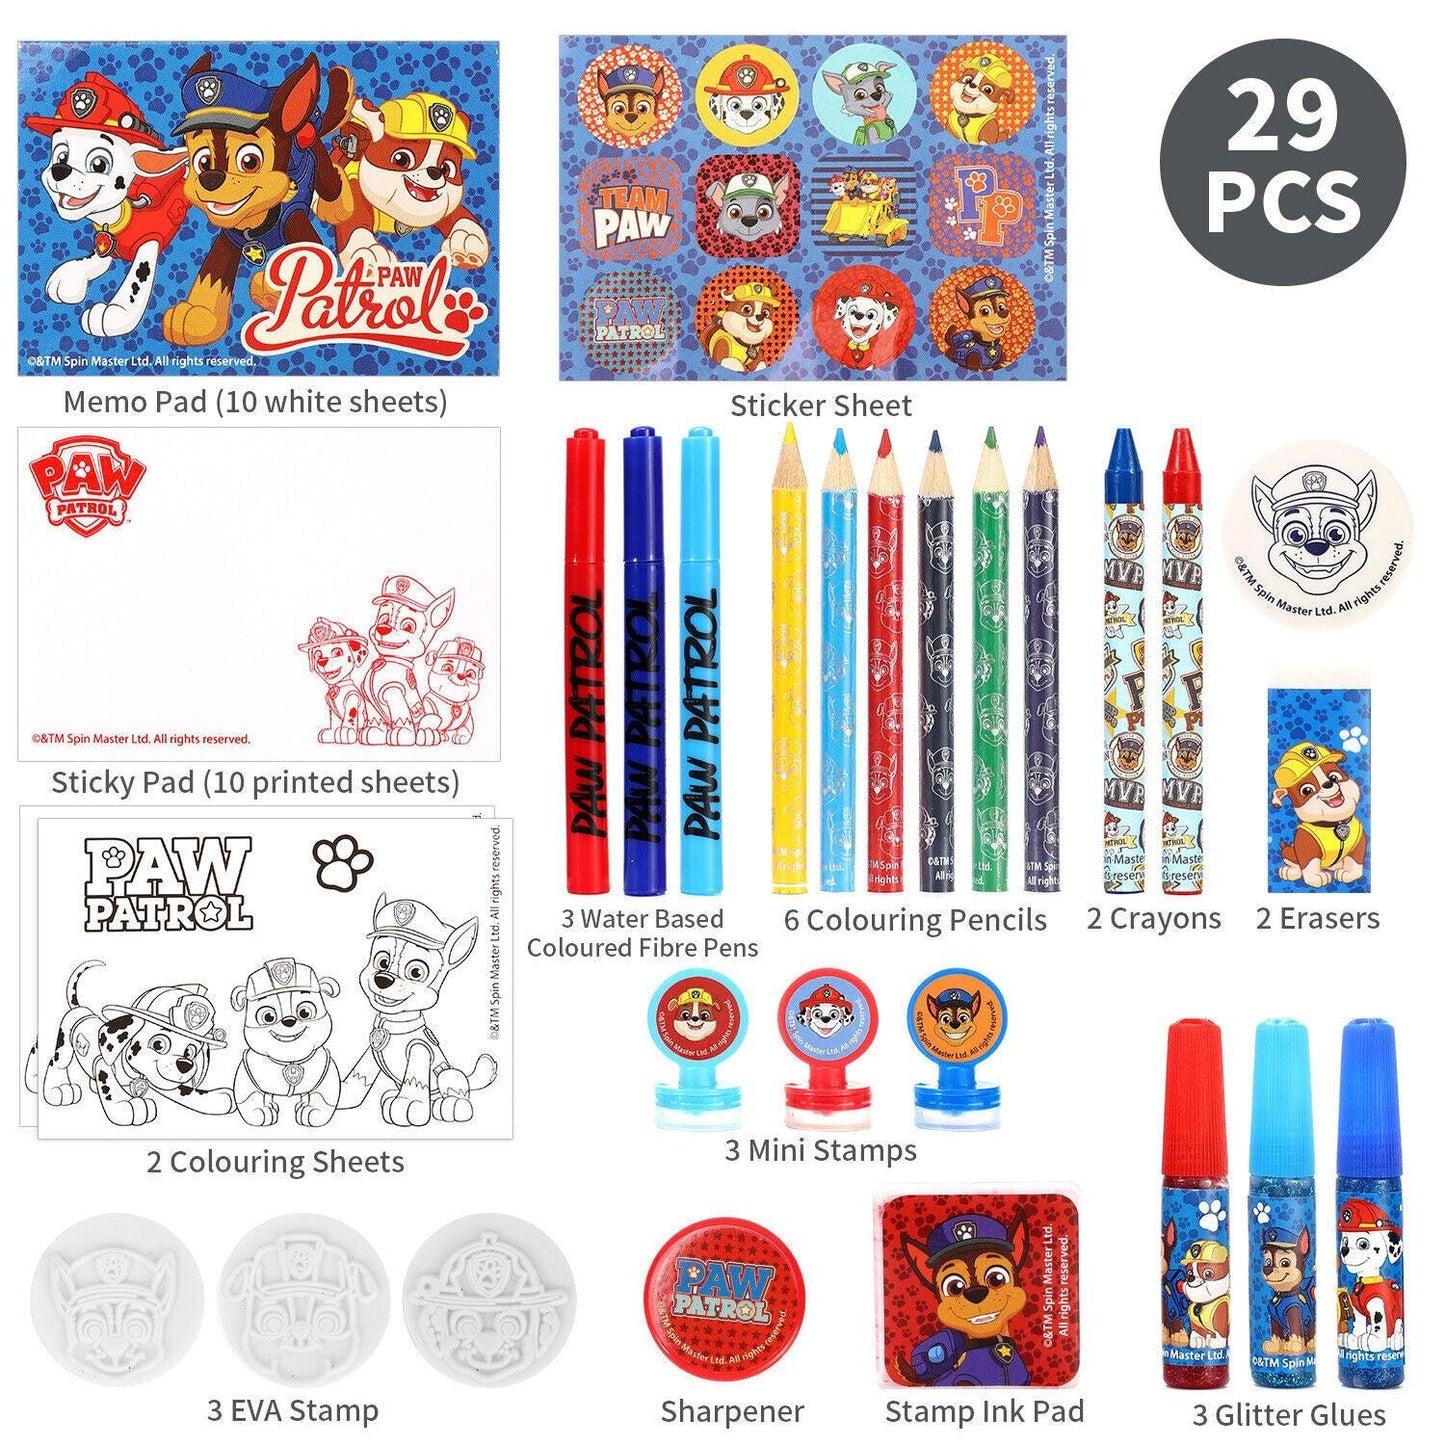 Paw Patrol Christmas Advent Calendar Art & Craft Stationery Set - Home Inspired Gifts